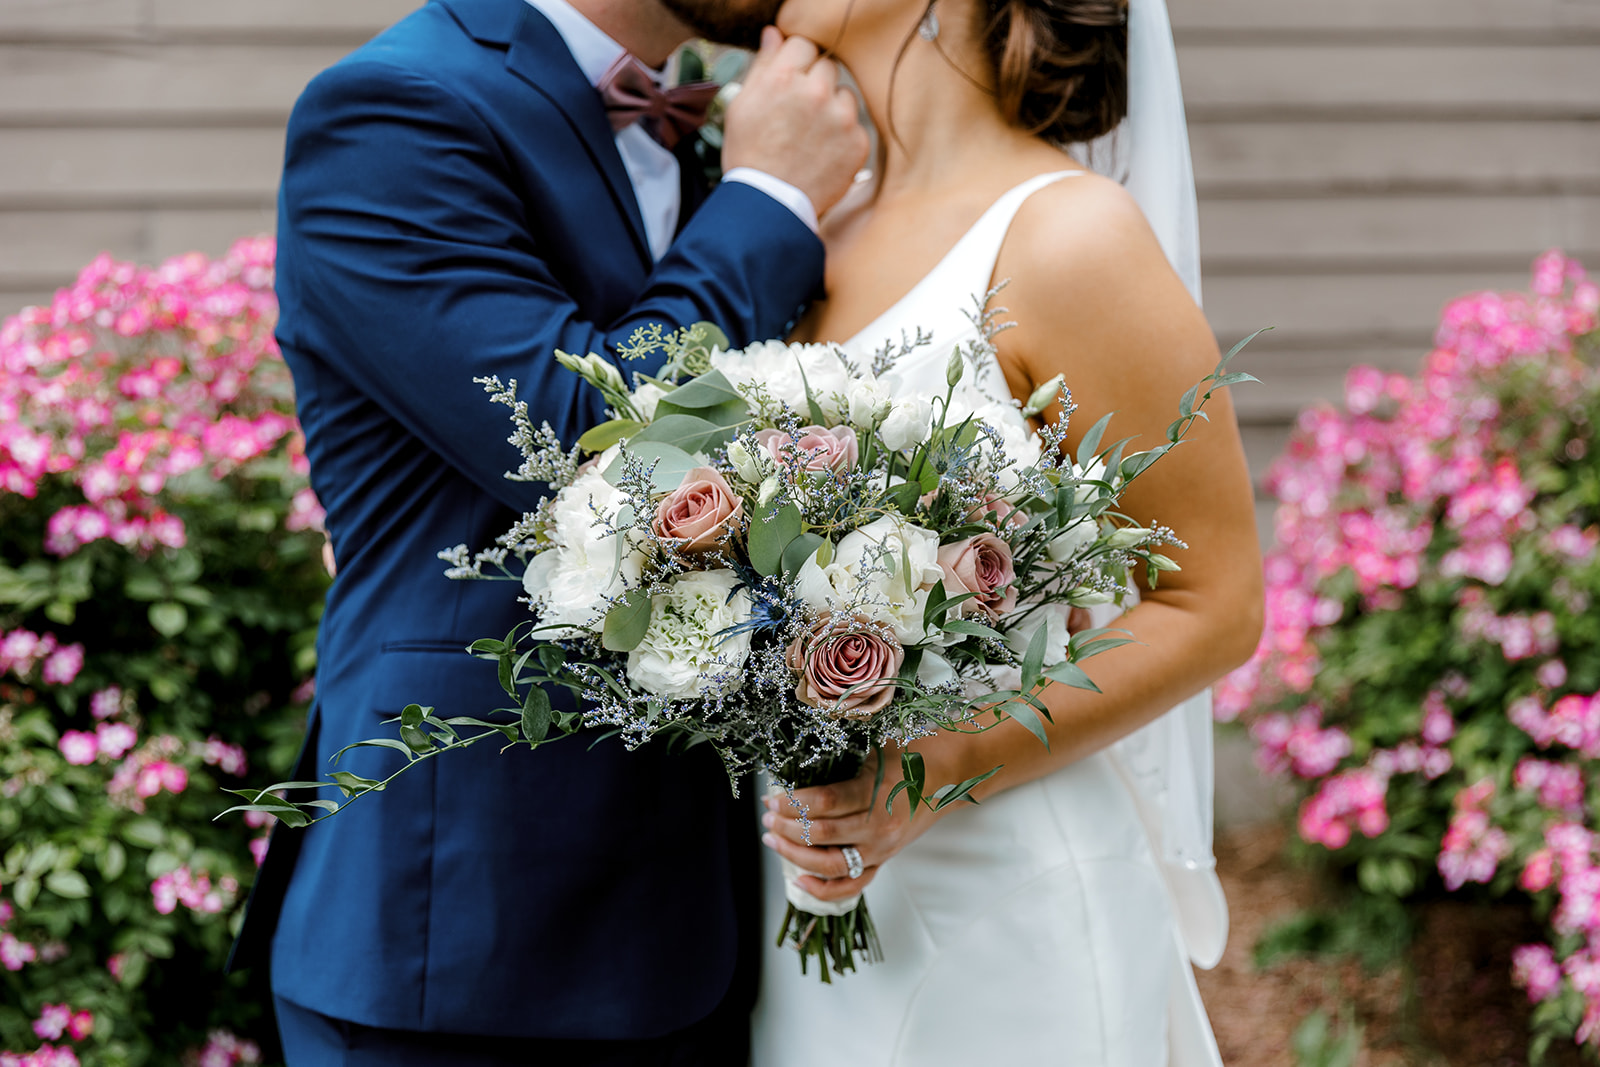 an upclose photo of bride and groom holding her wedding bouquet and kissing with a Michigan wedding photographer Port 393 Wedding In Holland, Michigan | Allie + Ryan